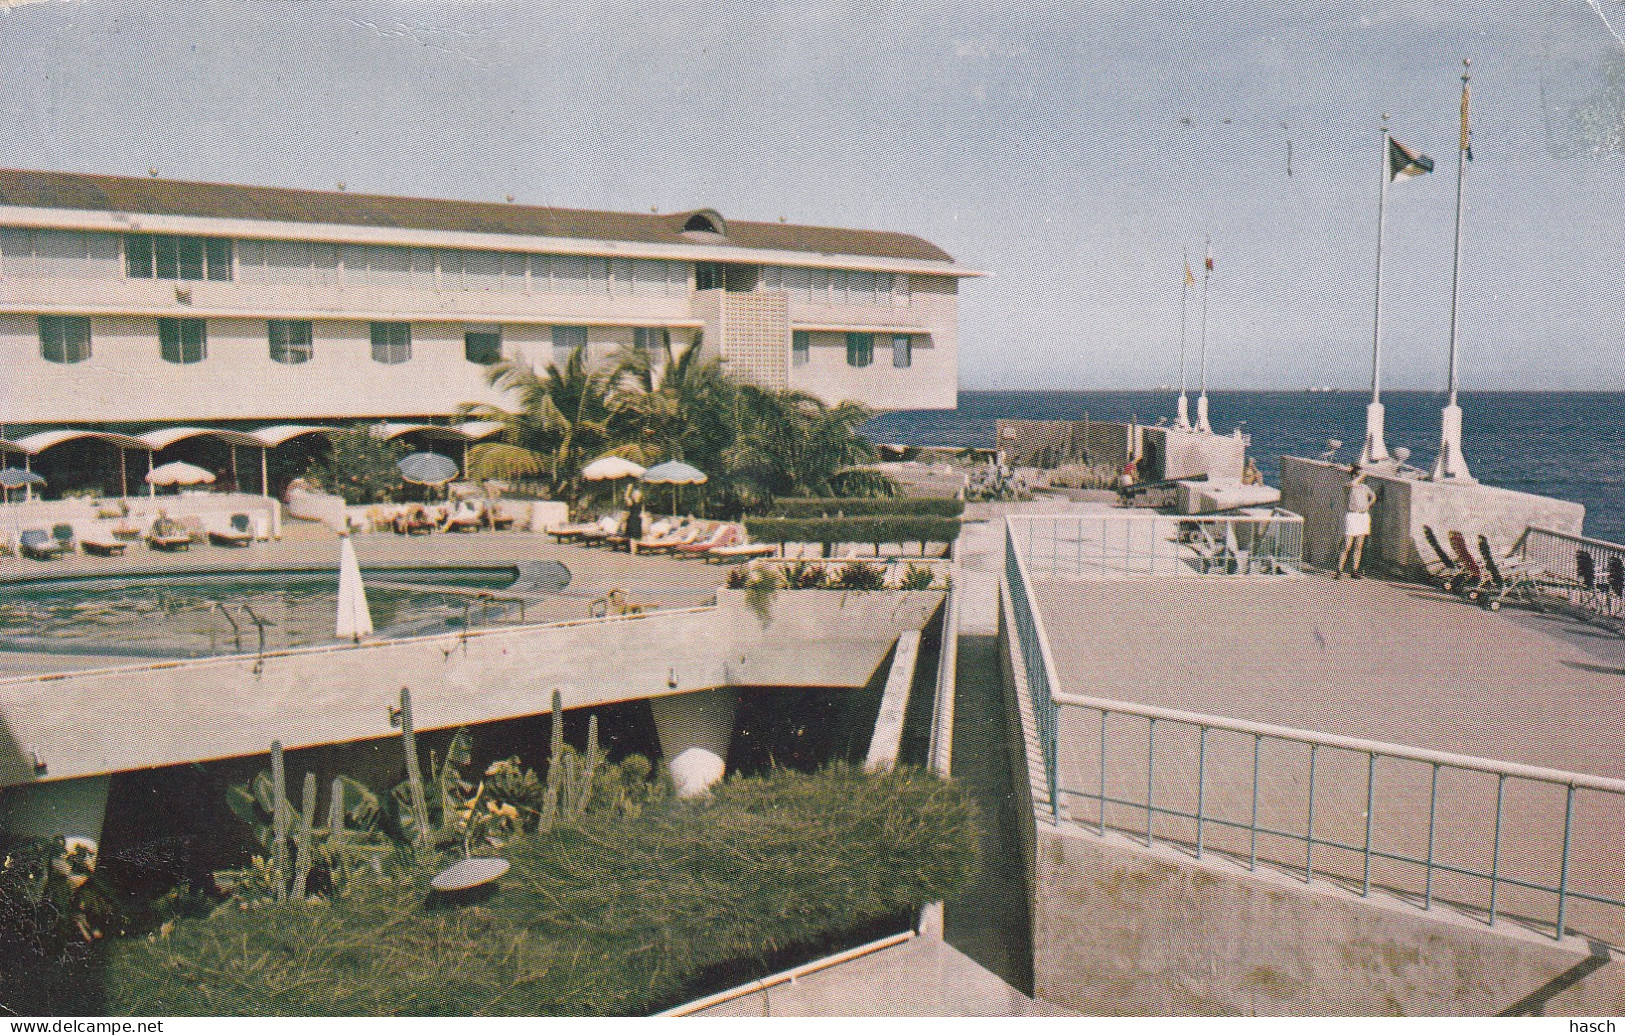 4924 265 Curacao, Rear View Of Hotel Curacao. (Bottom Left And Top Right Adhesive Tape Tracks)  - Curaçao